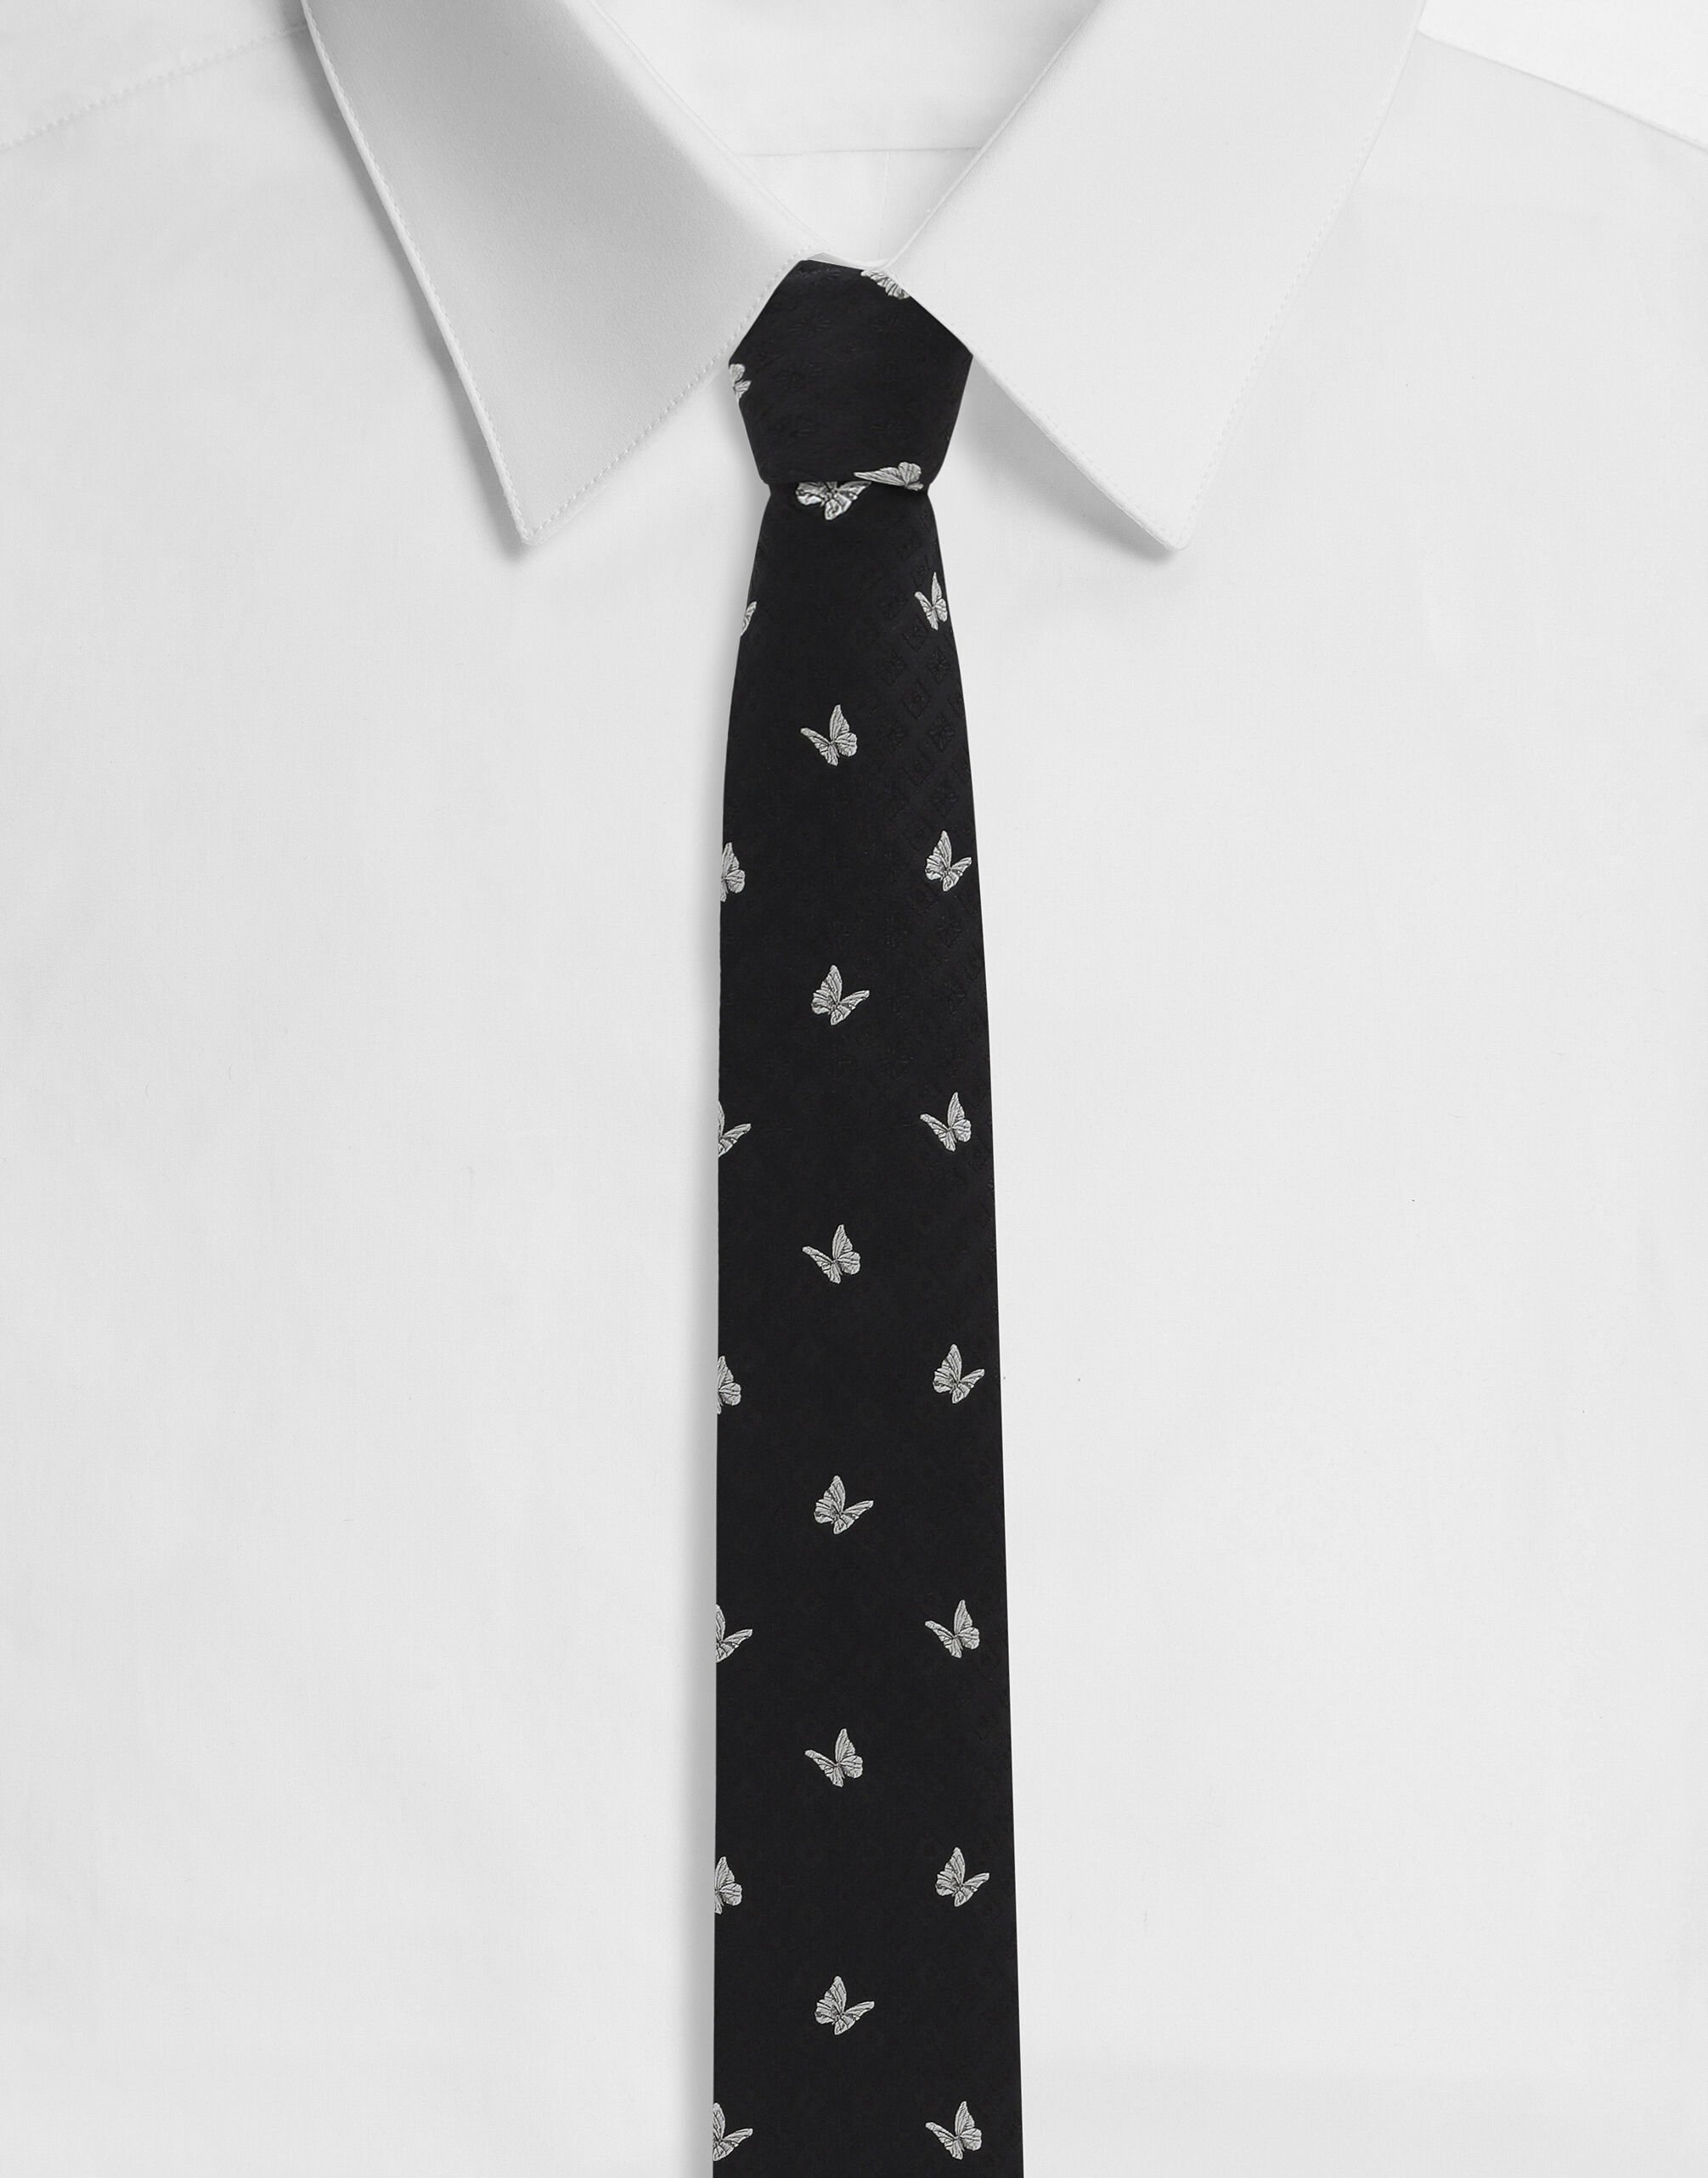 ${brand} Silk jacquard tie with butterfly design ${colorDescription} ${masterID}